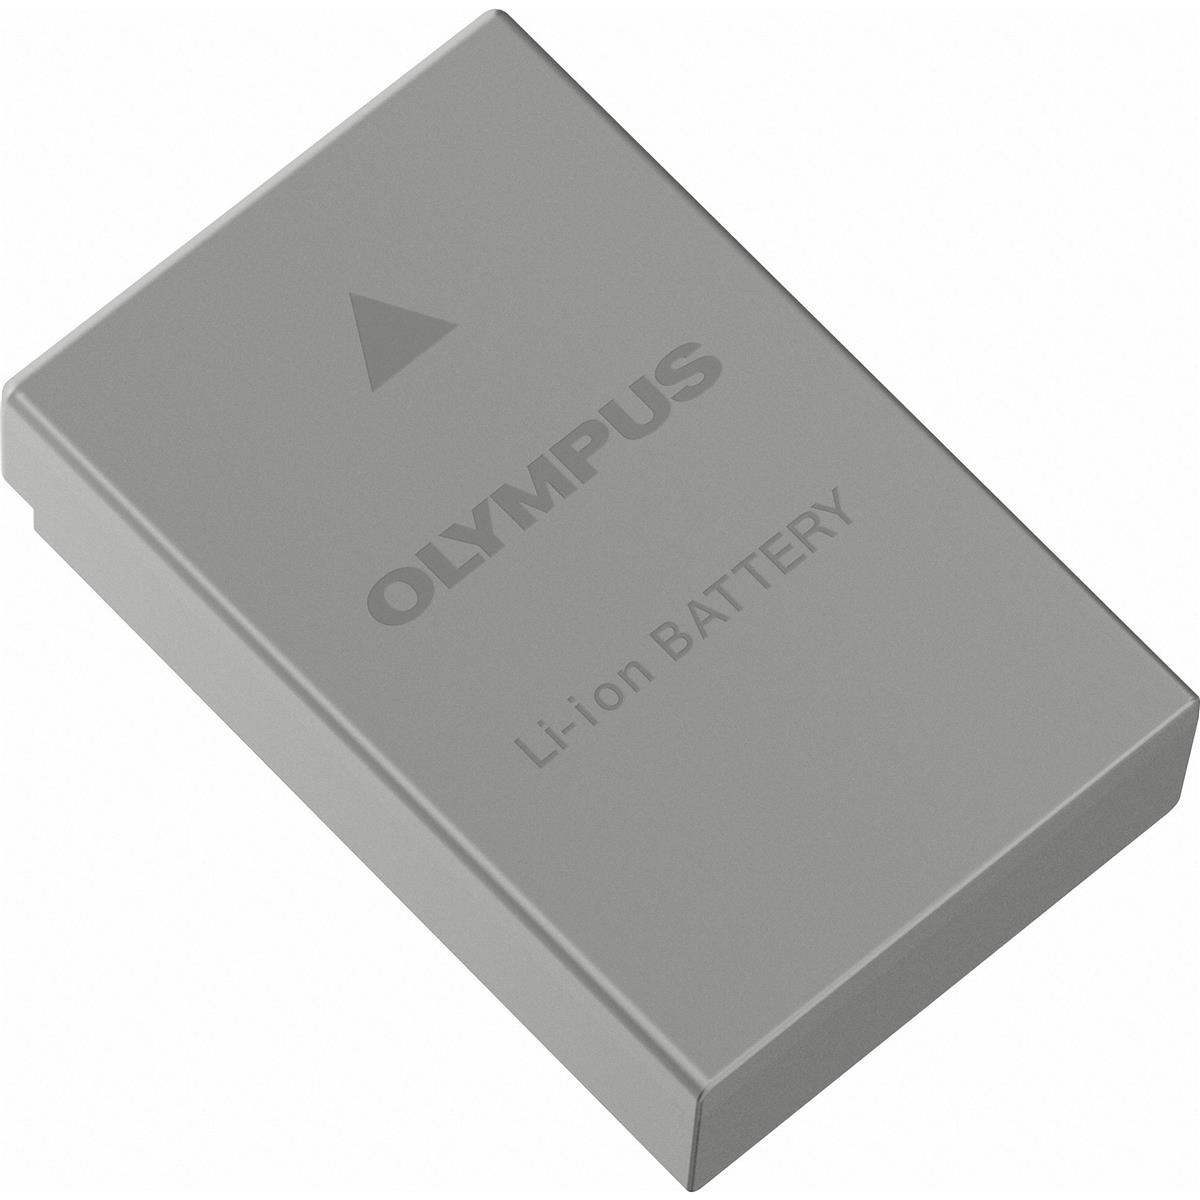 Image of Olympus BLS-50 7.2V 1175mAh Rechargeable Lithium-Ion Battery